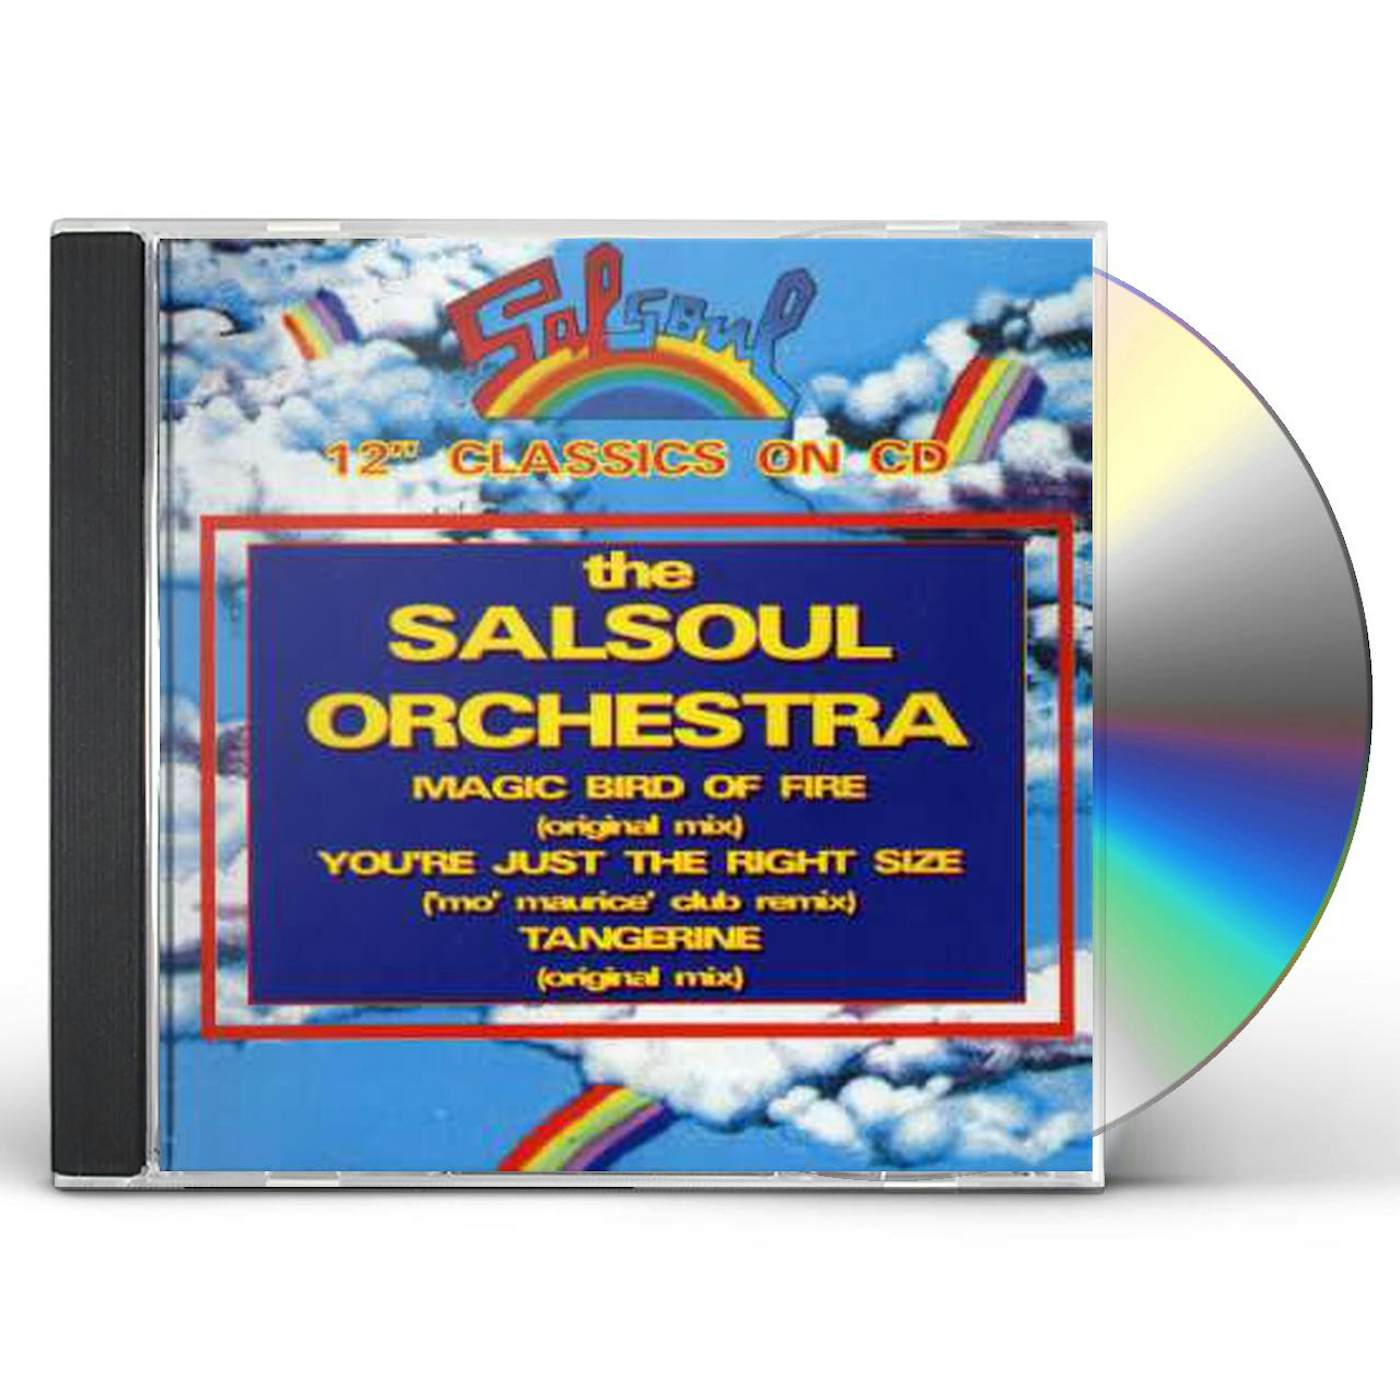 The Salsoul Orchestra MAGIC BIRD OF FIRE/YOURE JUST THE RIGHT CD